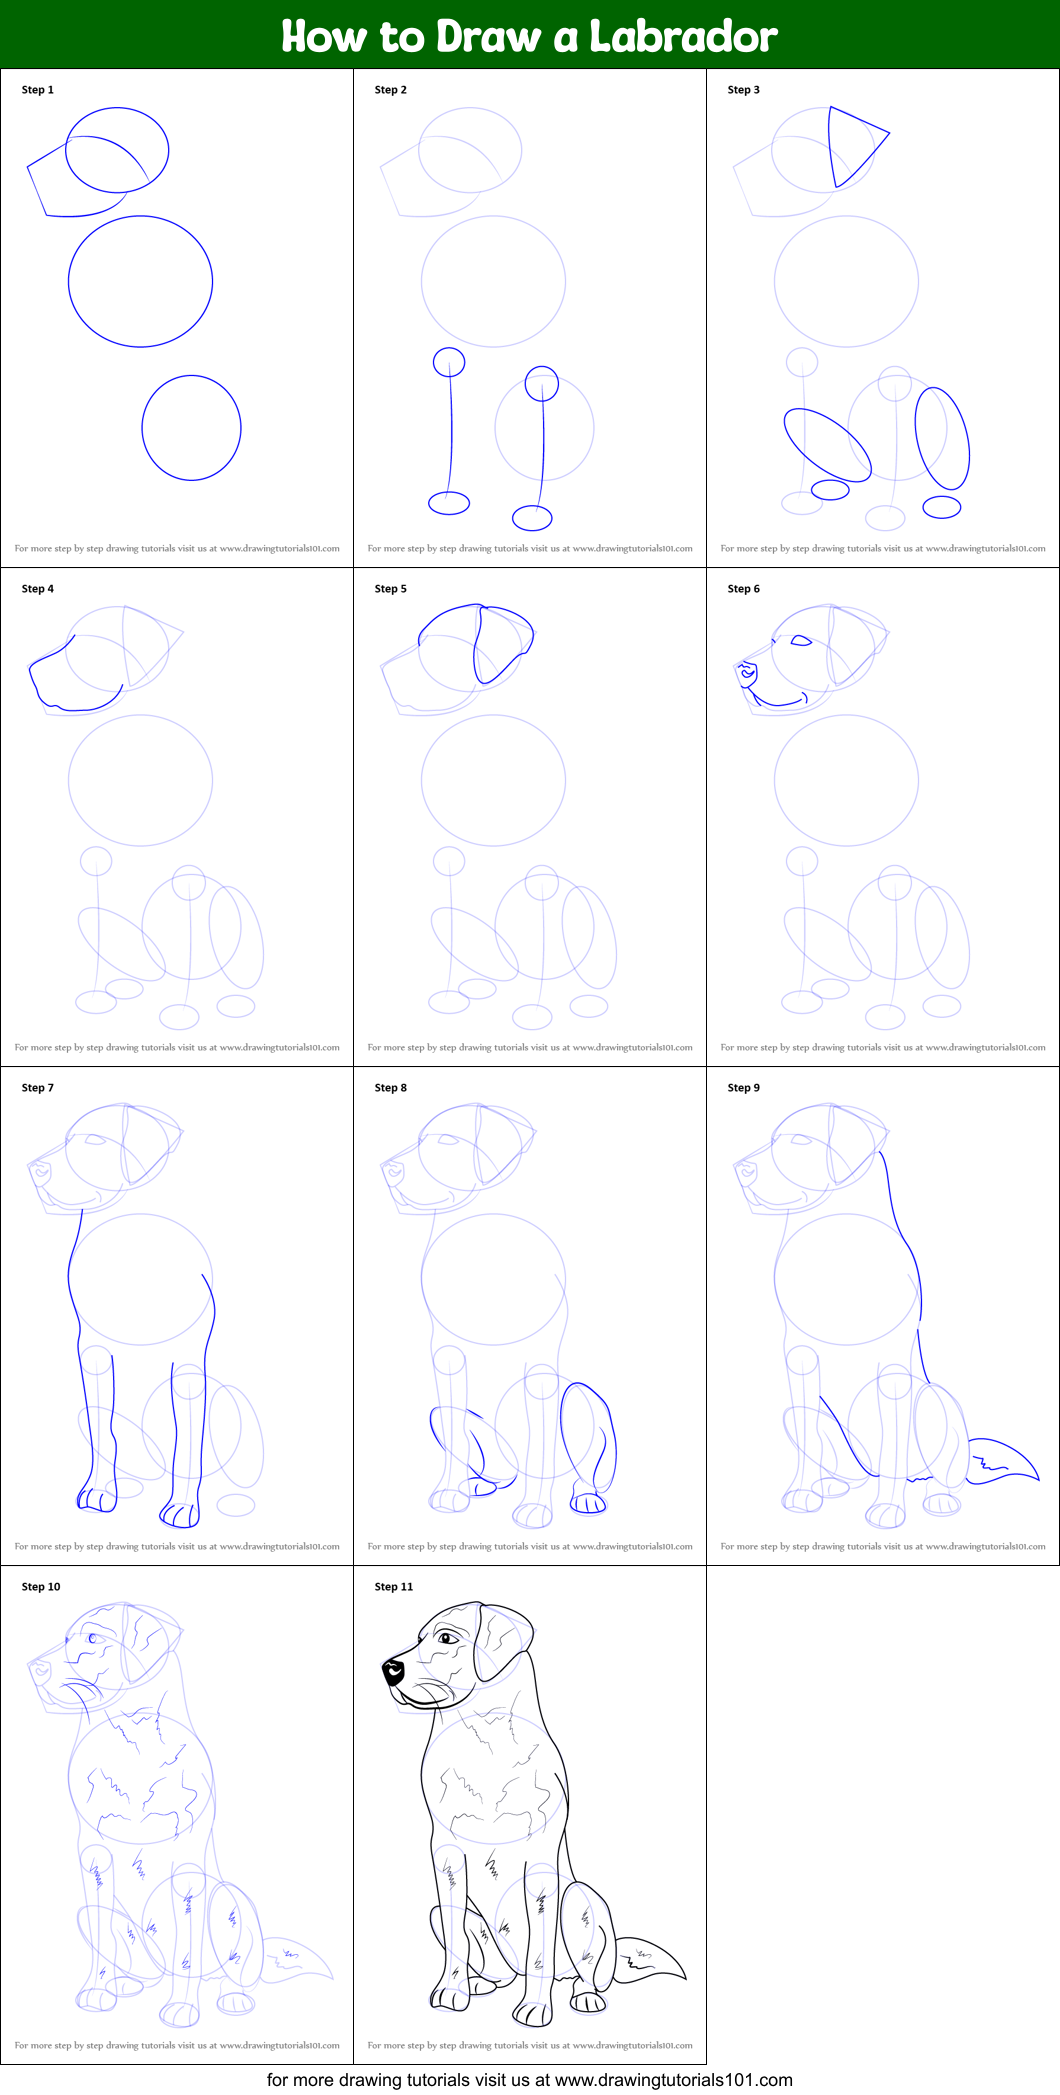 How to Draw a Labrador printable step by step drawing sheet ...